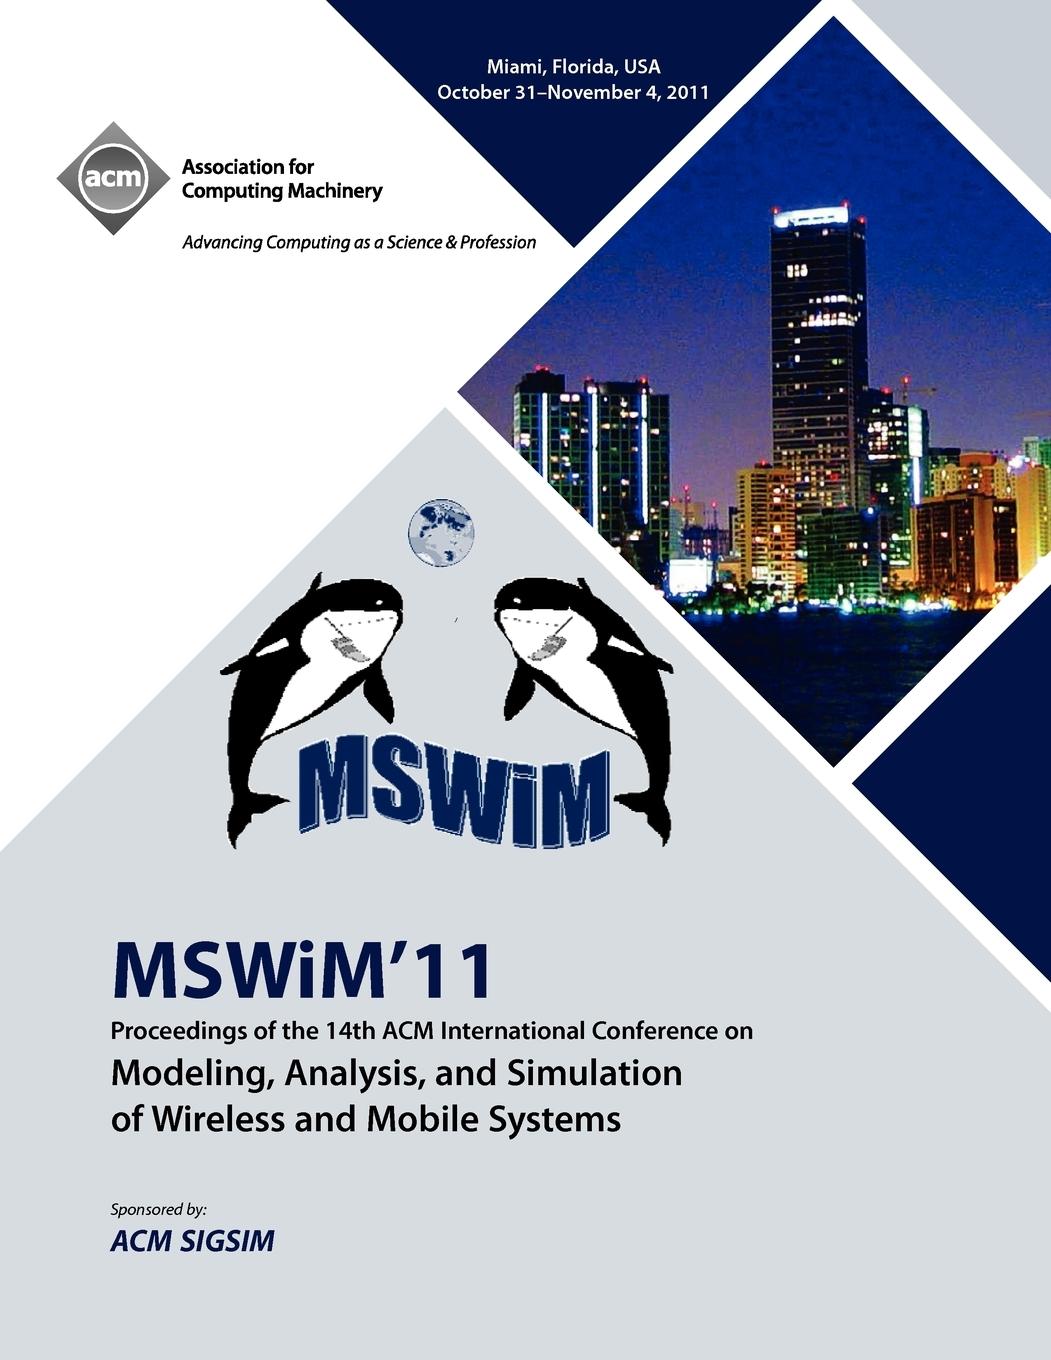 MSWIM 11 Proceedings of the 14th ACM International Conference on Modeling, Analysis and Simulation of Wireless and Mobile Systems - Mswim 11 Conference Committee